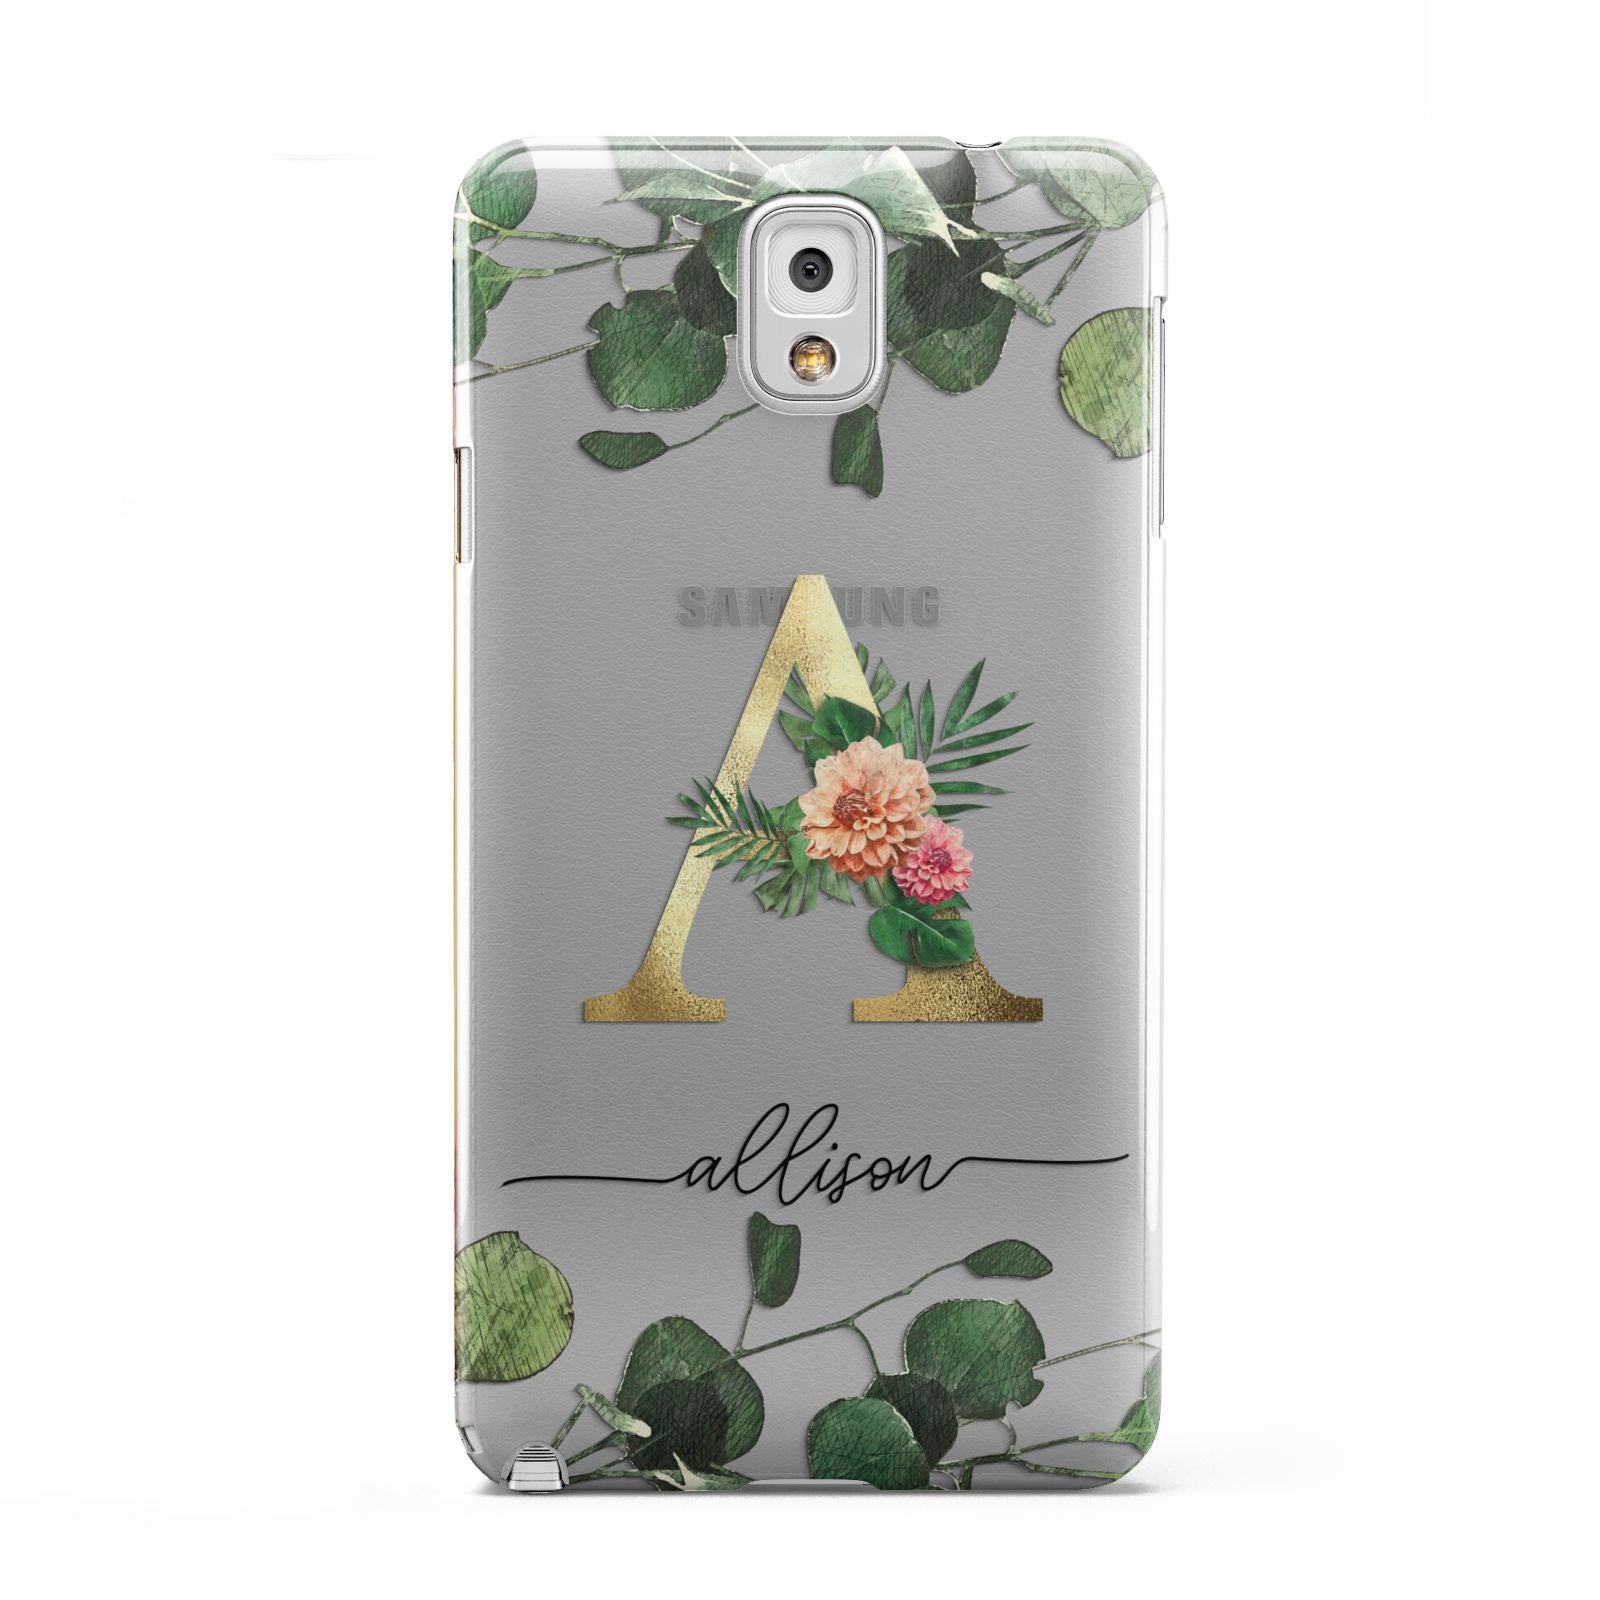 Personalised Forest Monogram Samsung Galaxy Note 3 Case